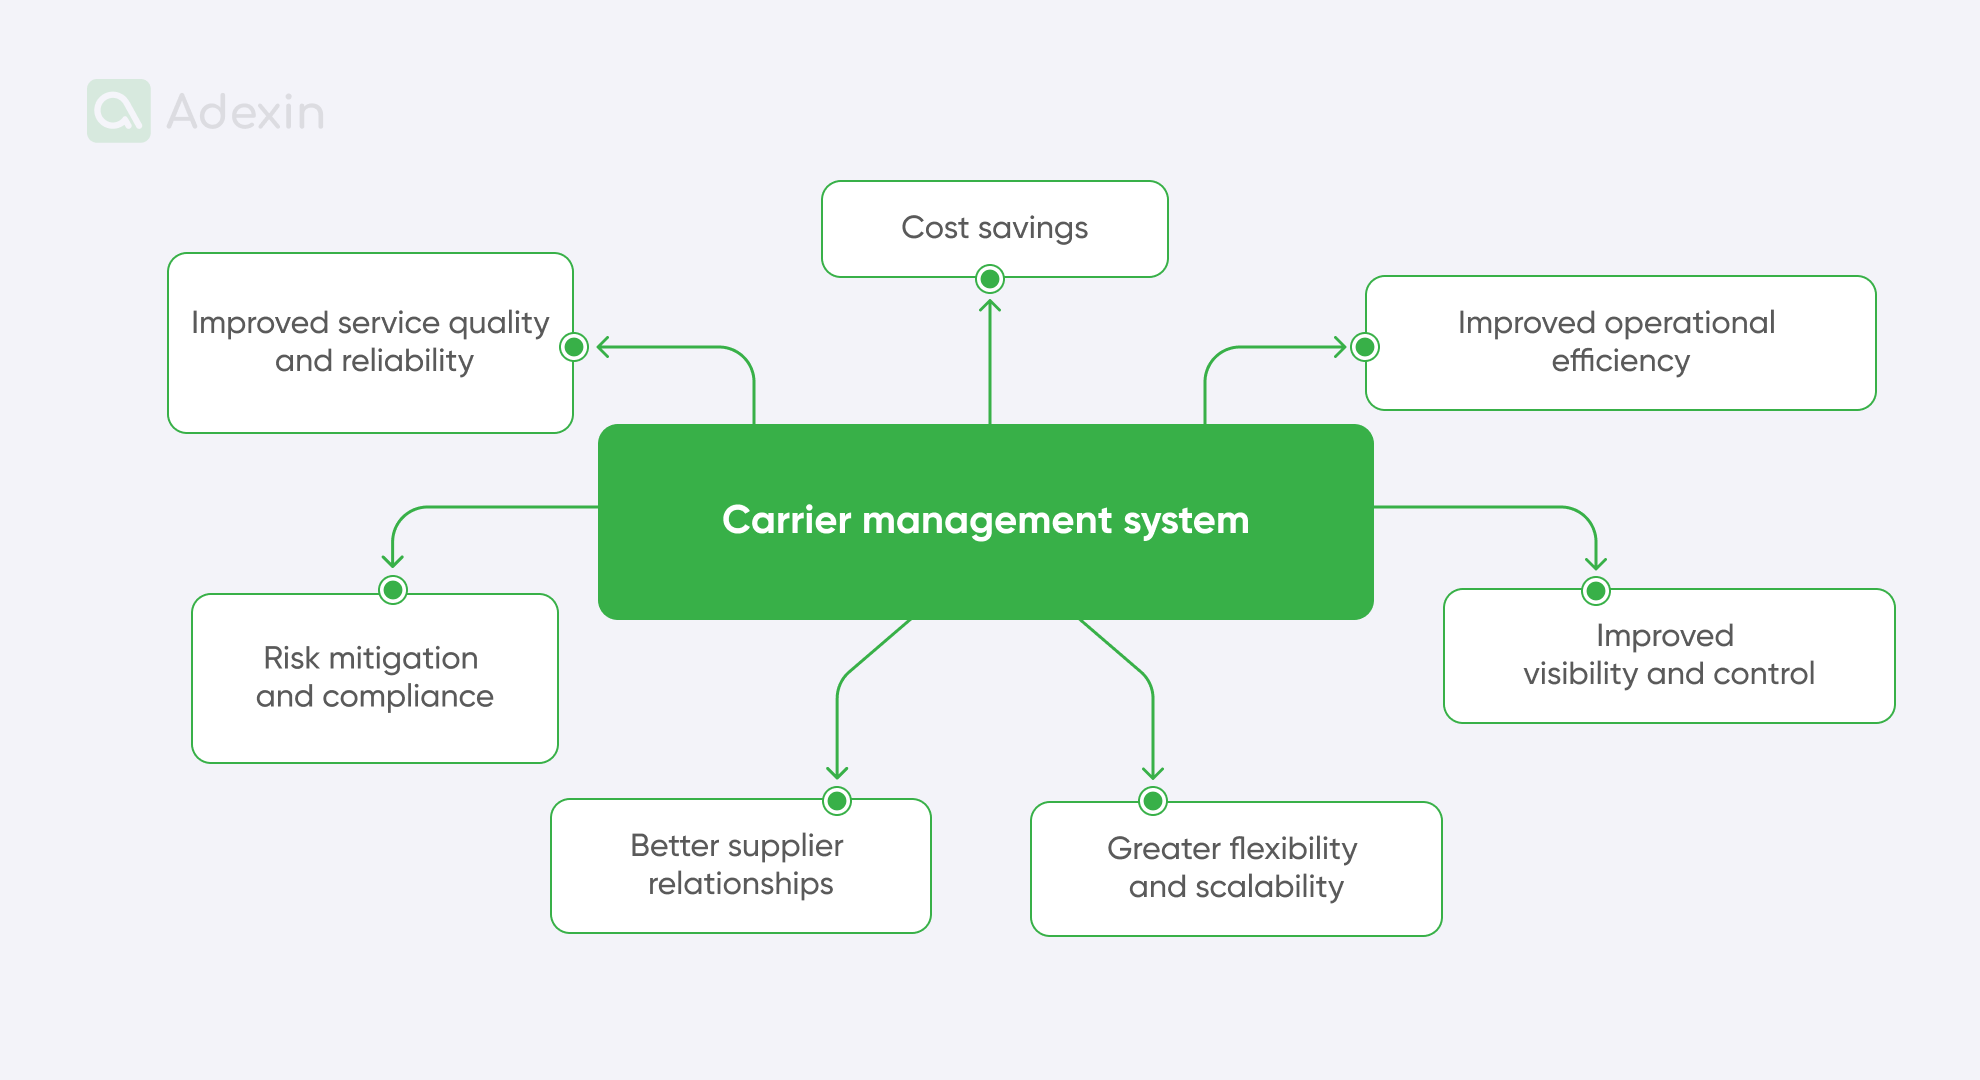 Benefits of the carrier management system